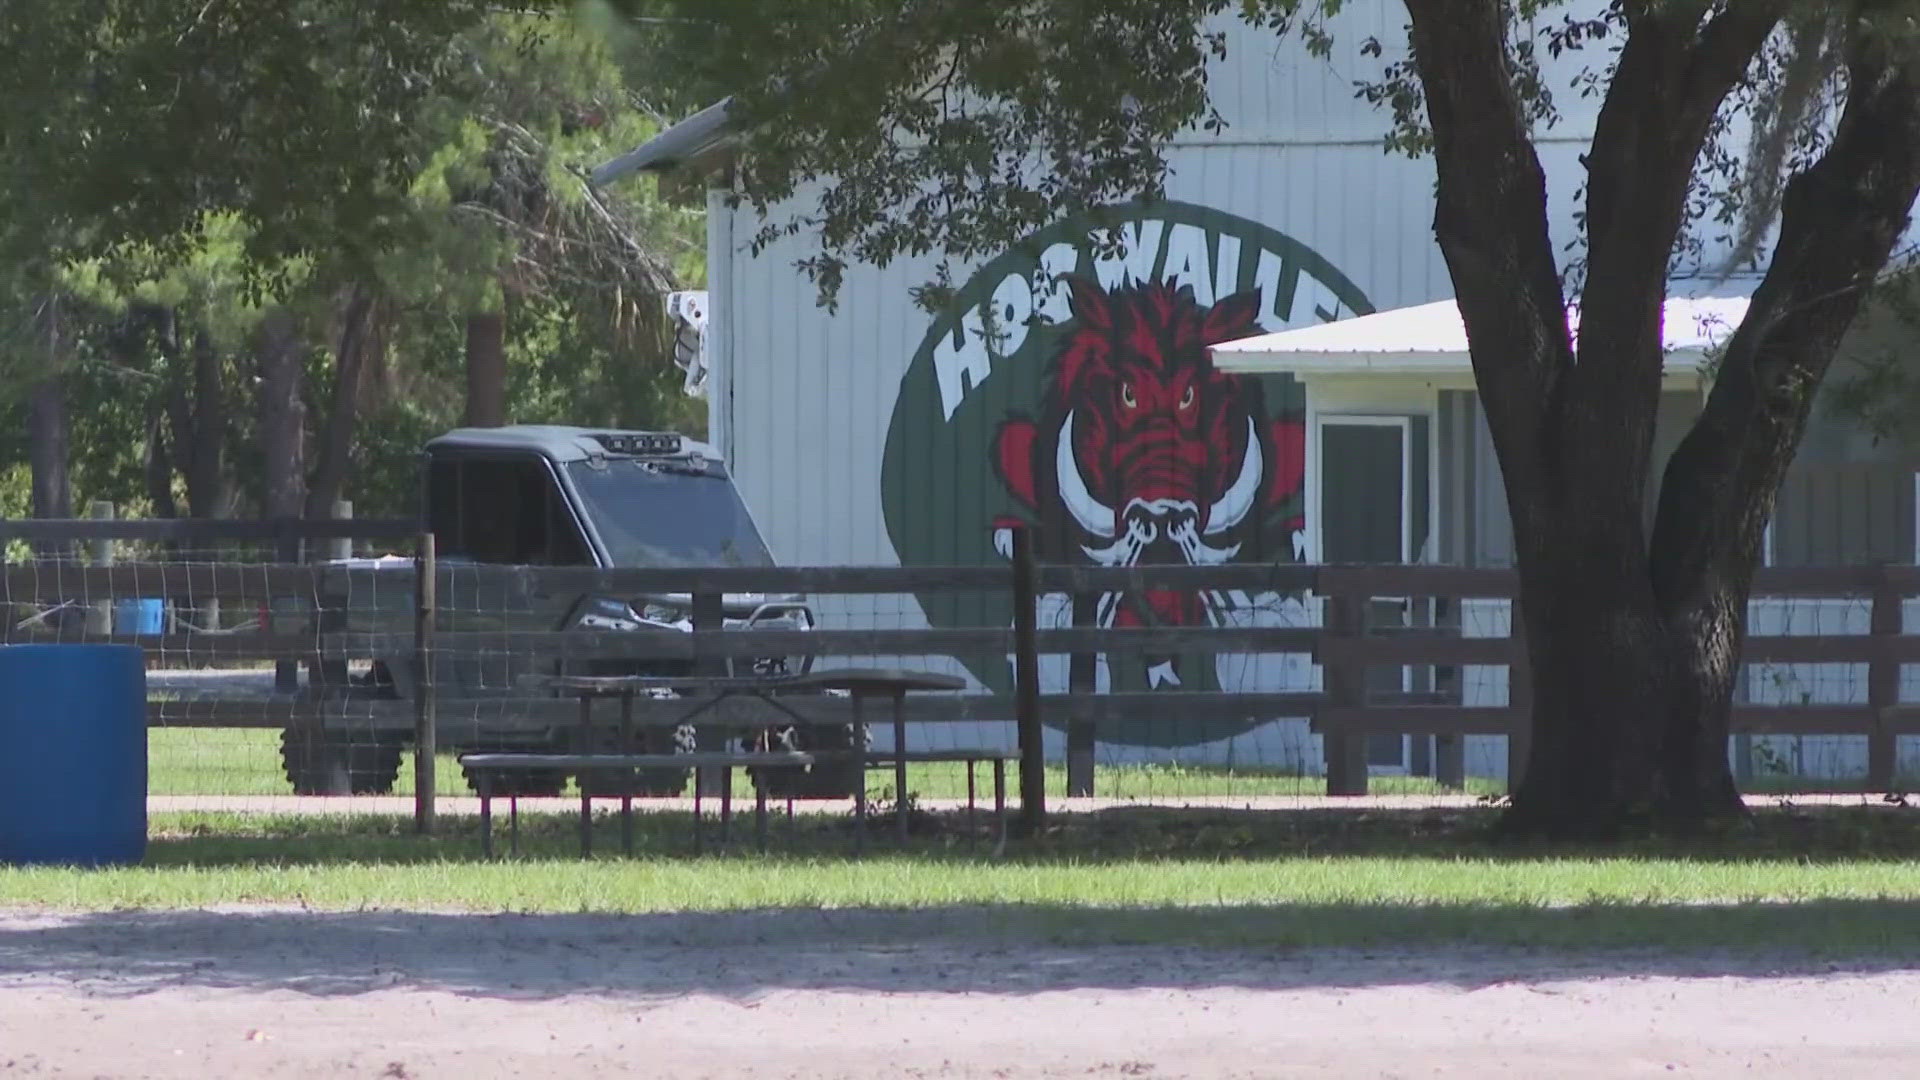 Concerns come after a 7-year-old boy was killed in a crash at Hog Waller Campground & ATV Resort. His death marked the 4th at the site since 2019.